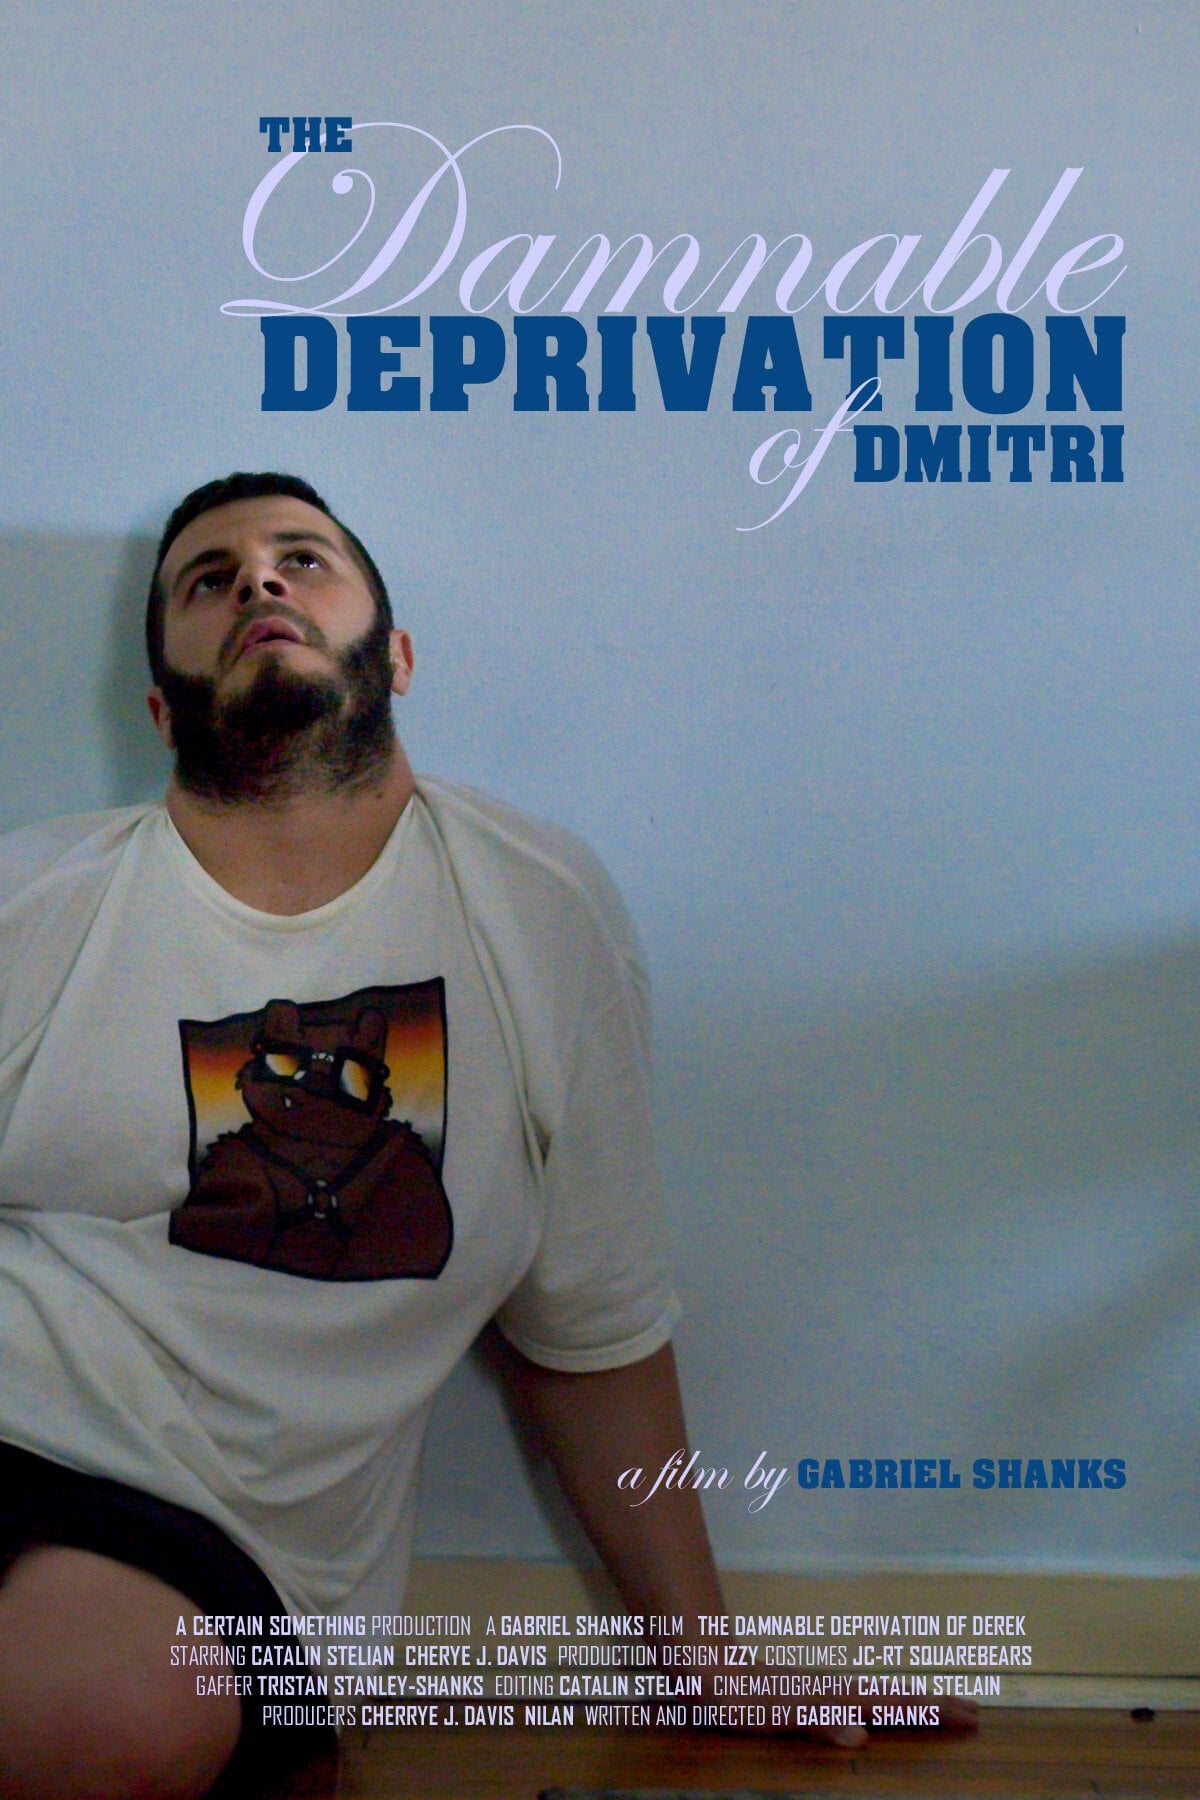 The Damnable Deprivation of Dmitri